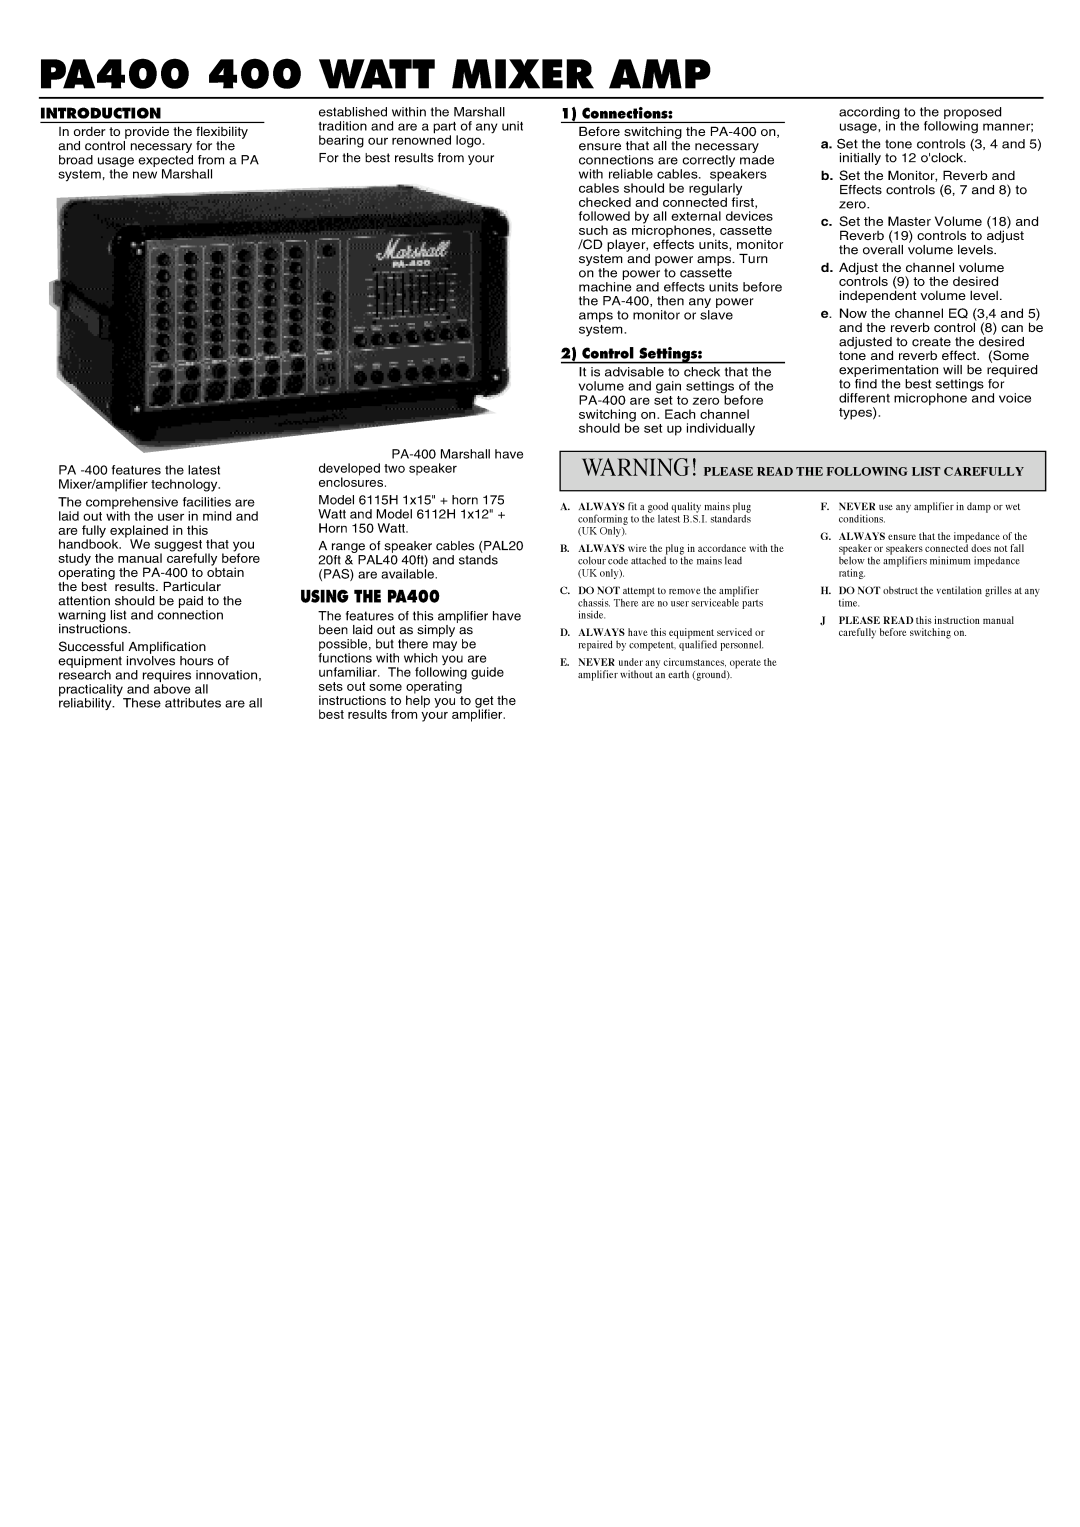 Marshall Amplification PA400 specifications 